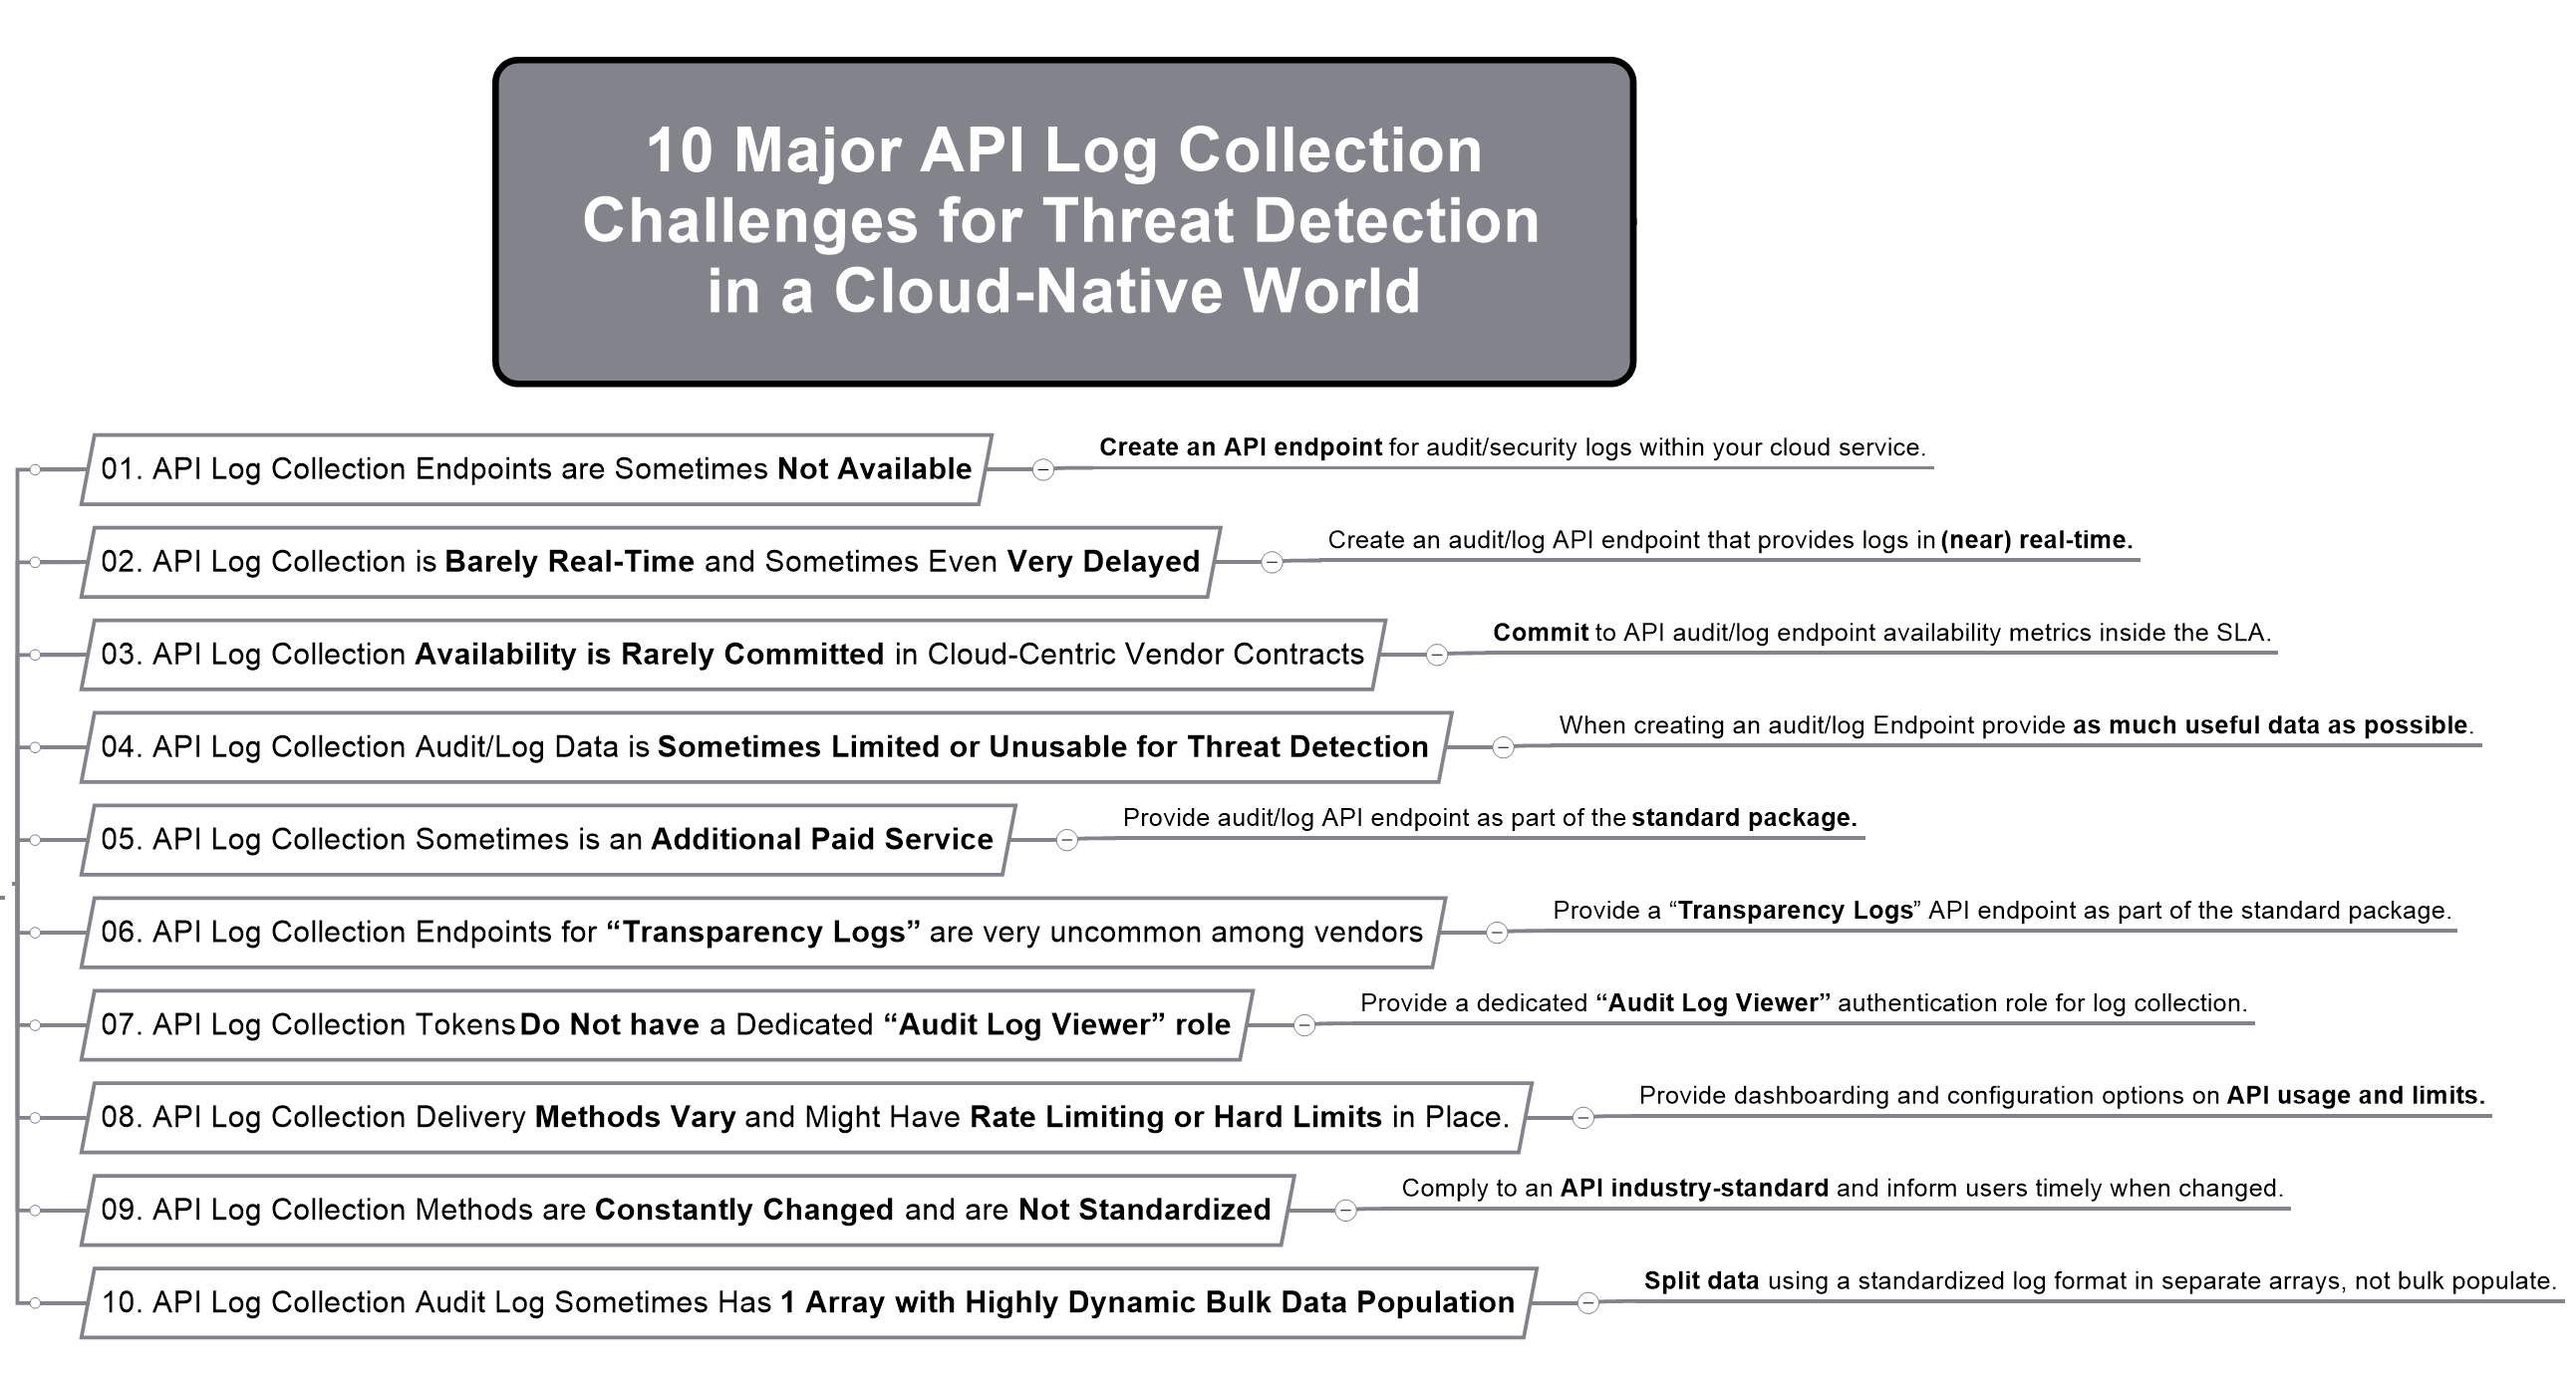 10 Major API Log Collection Challenges for Threat Detection